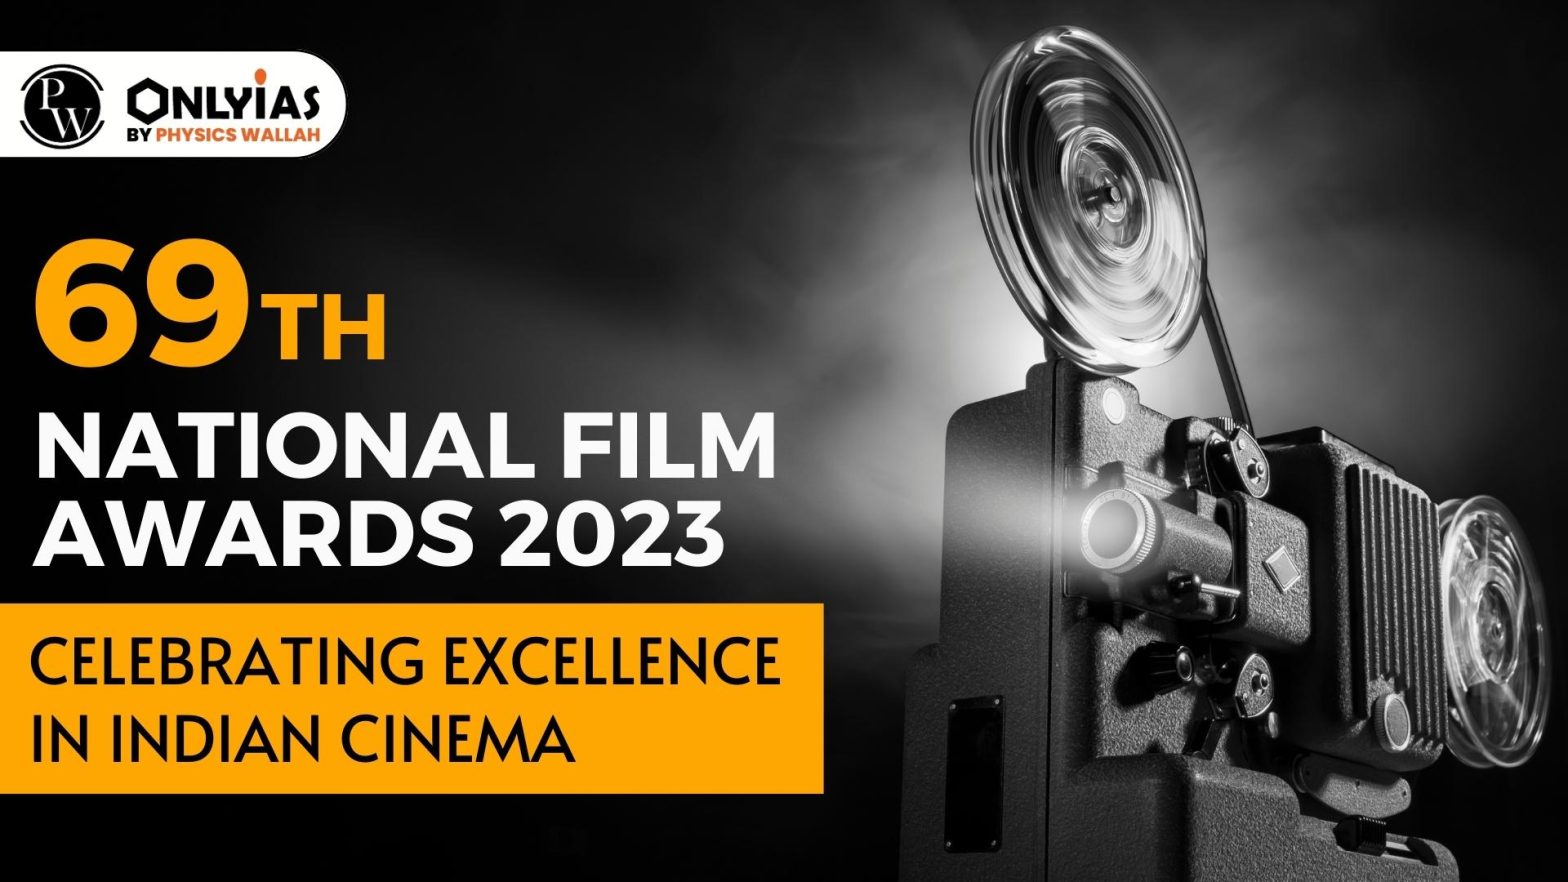 69th National Film Awards 2023: Celebrating Excellence in Indian Cinema